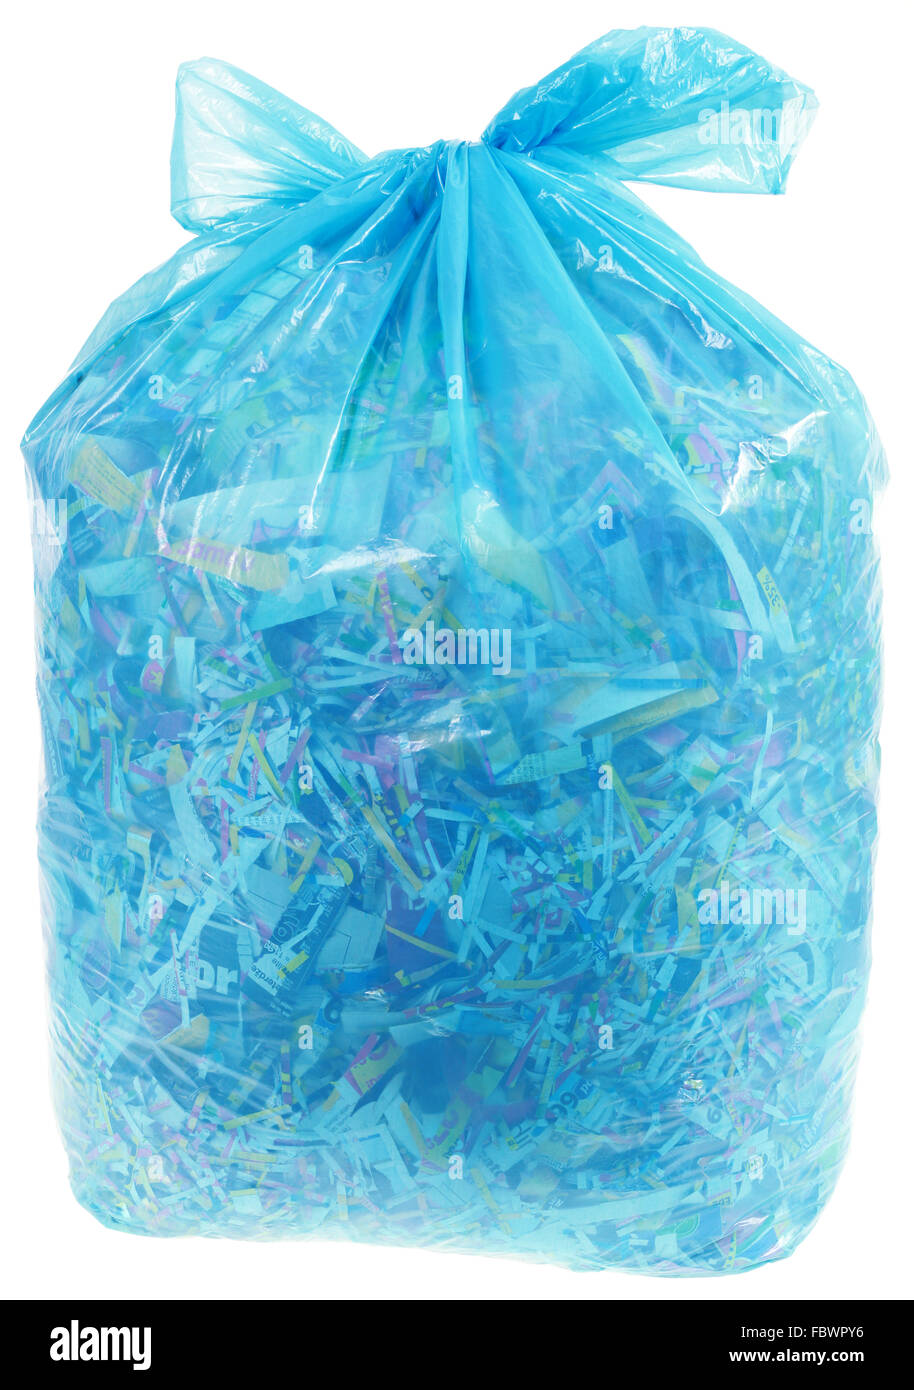 Transparent Plastic Bag Full With Air Isolated On White Stock